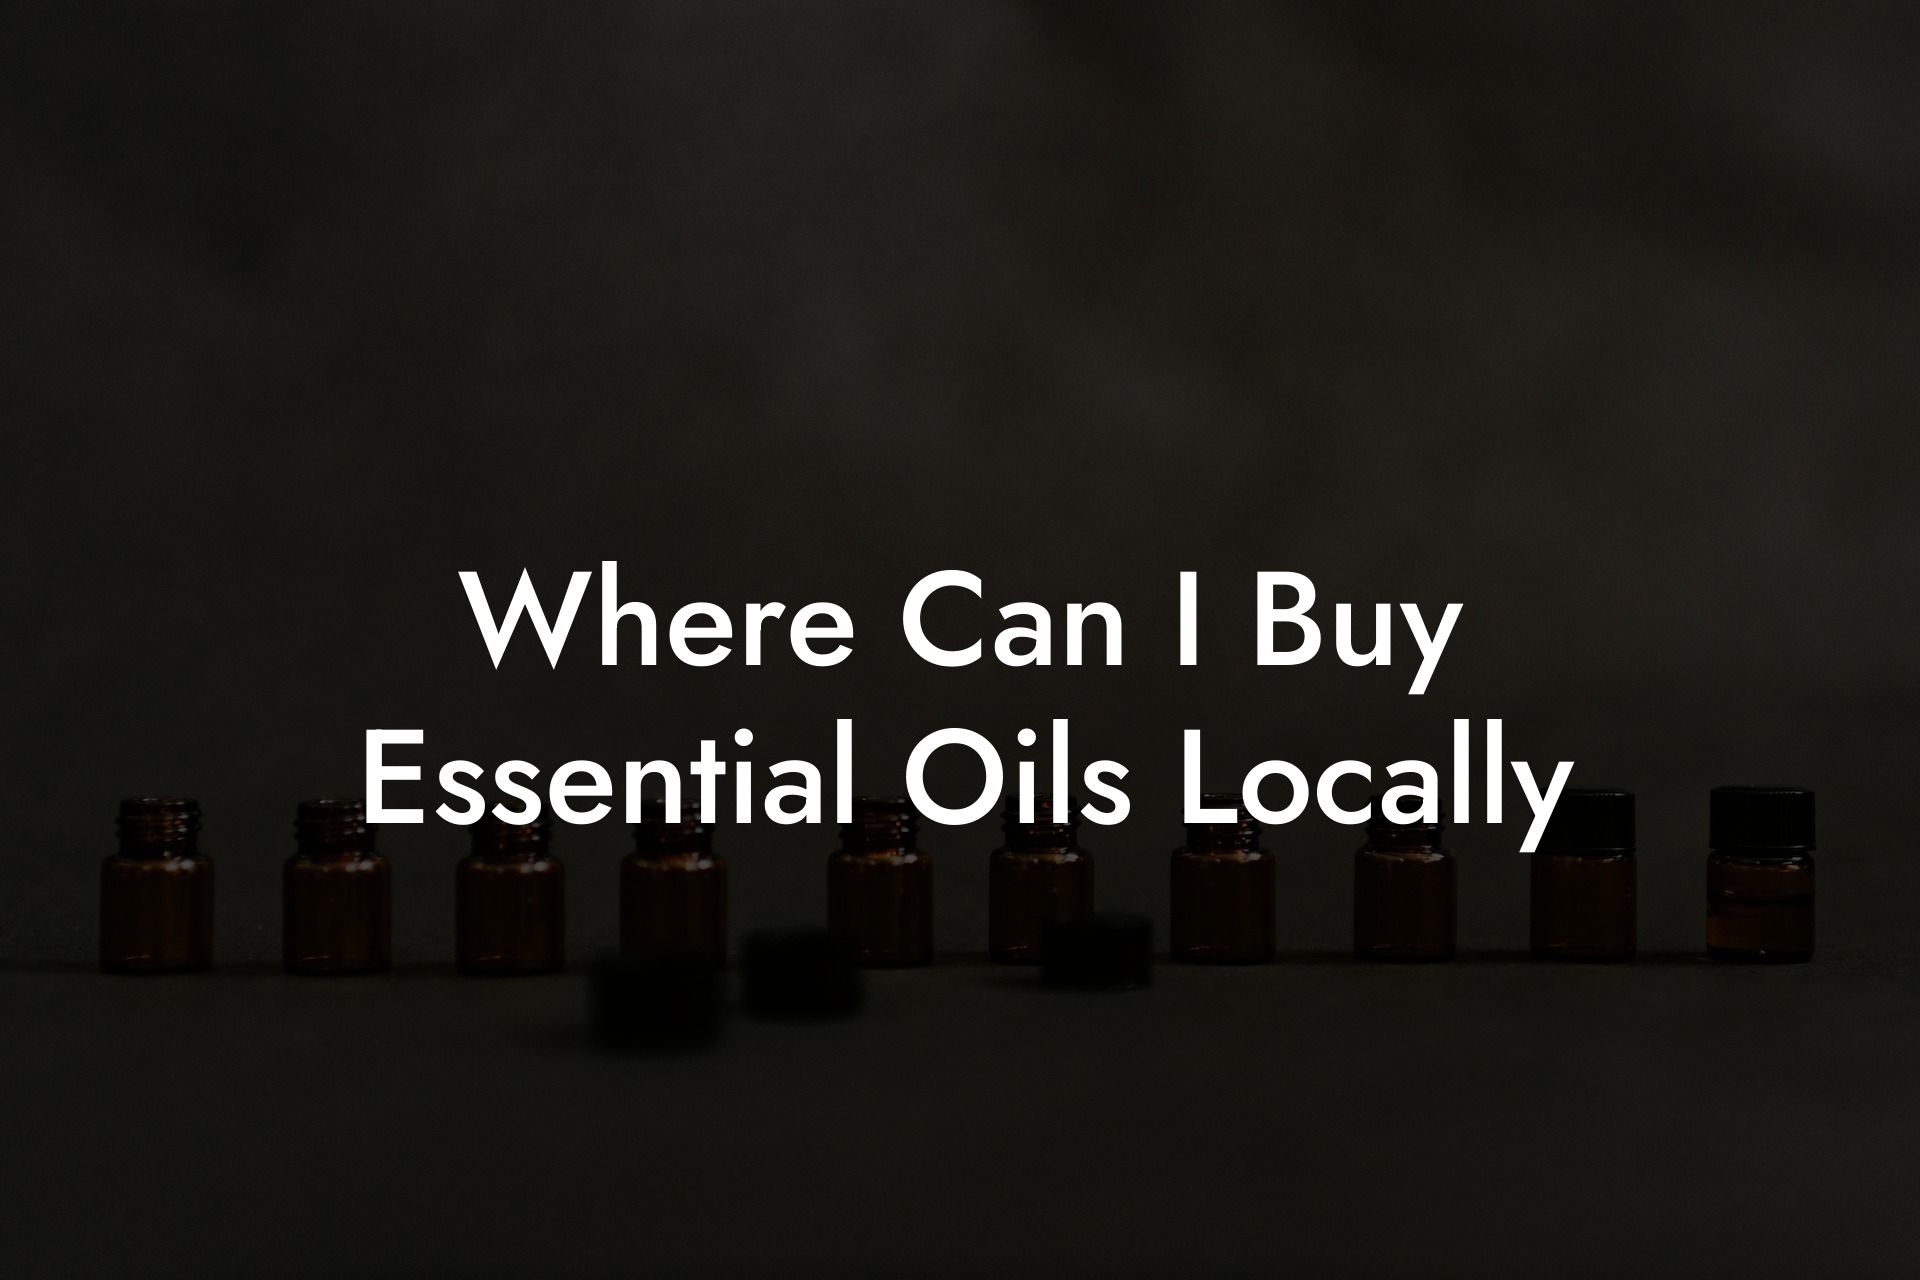 Where Can I Buy Essential Oils Locally